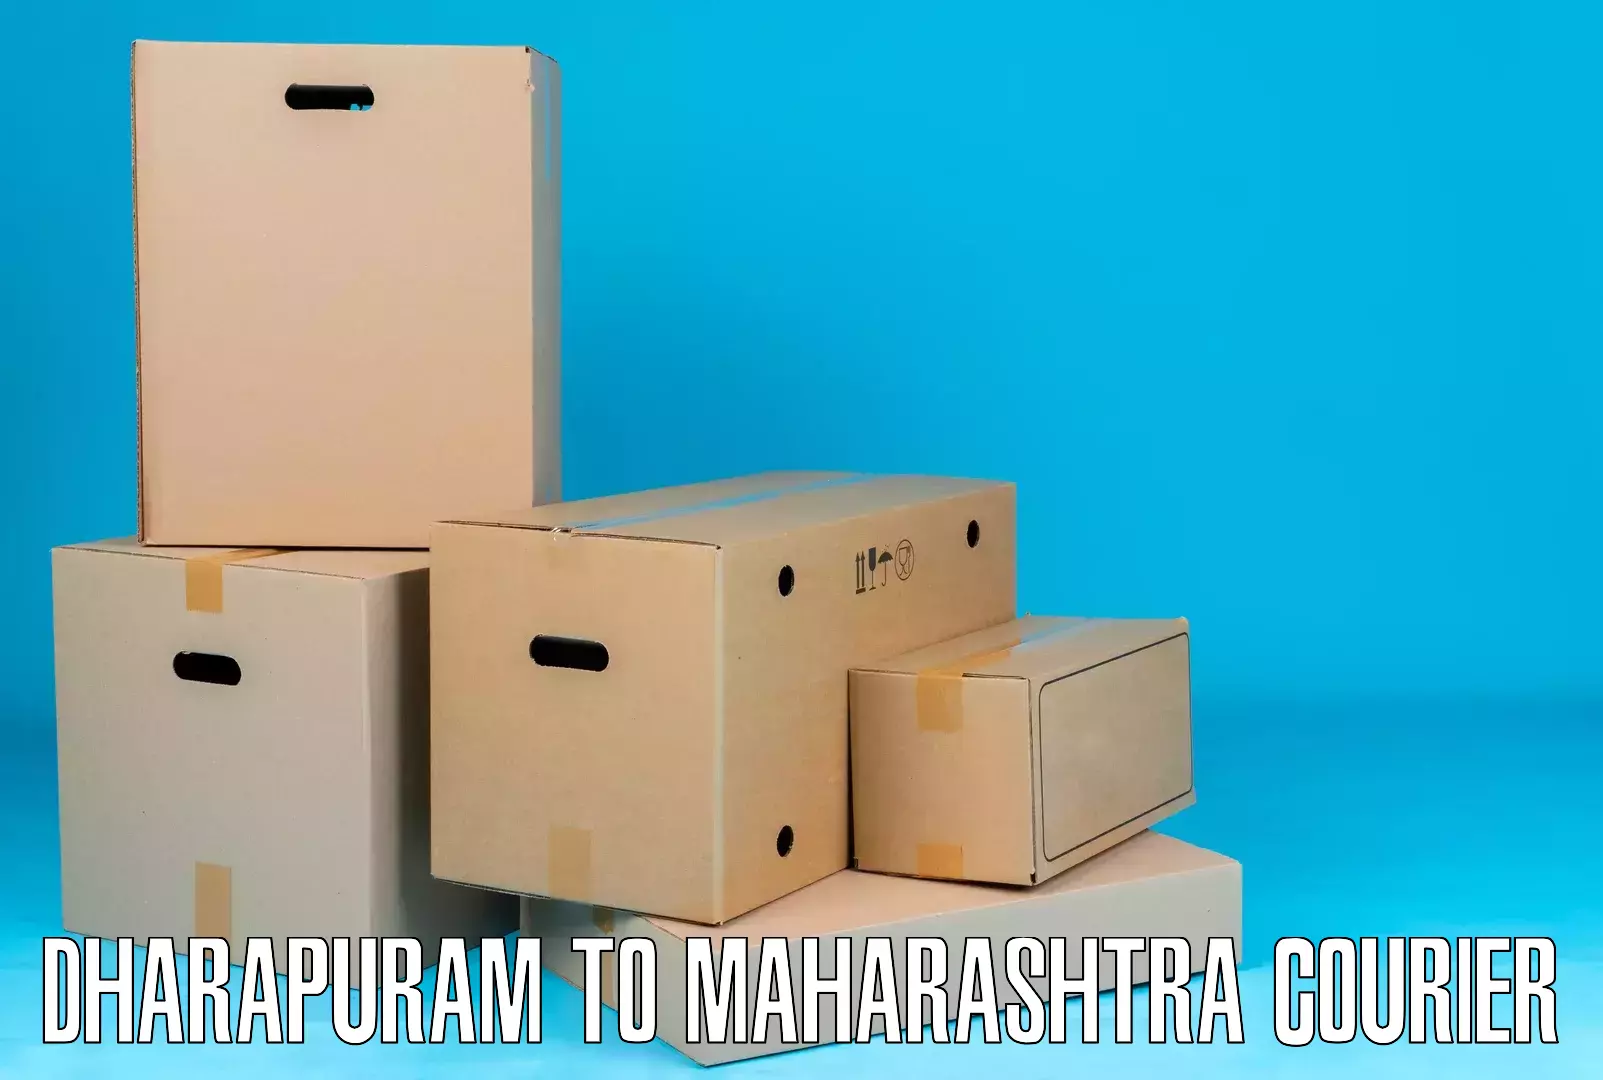 Efficient shipping operations Dharapuram to Oras